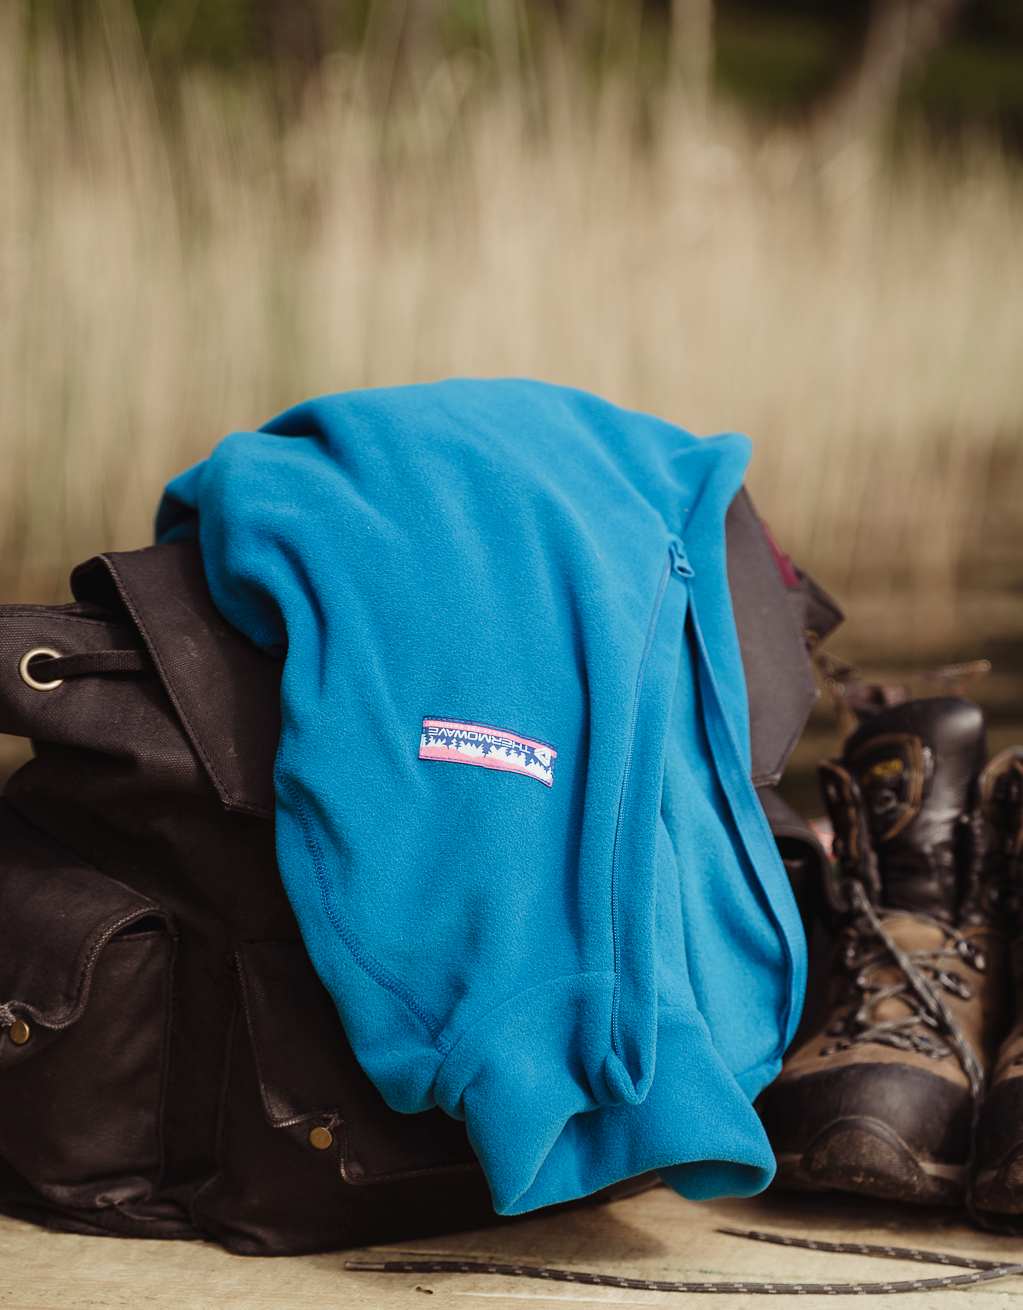 Blue fleece is put on the backpack next to hiking shoes and water